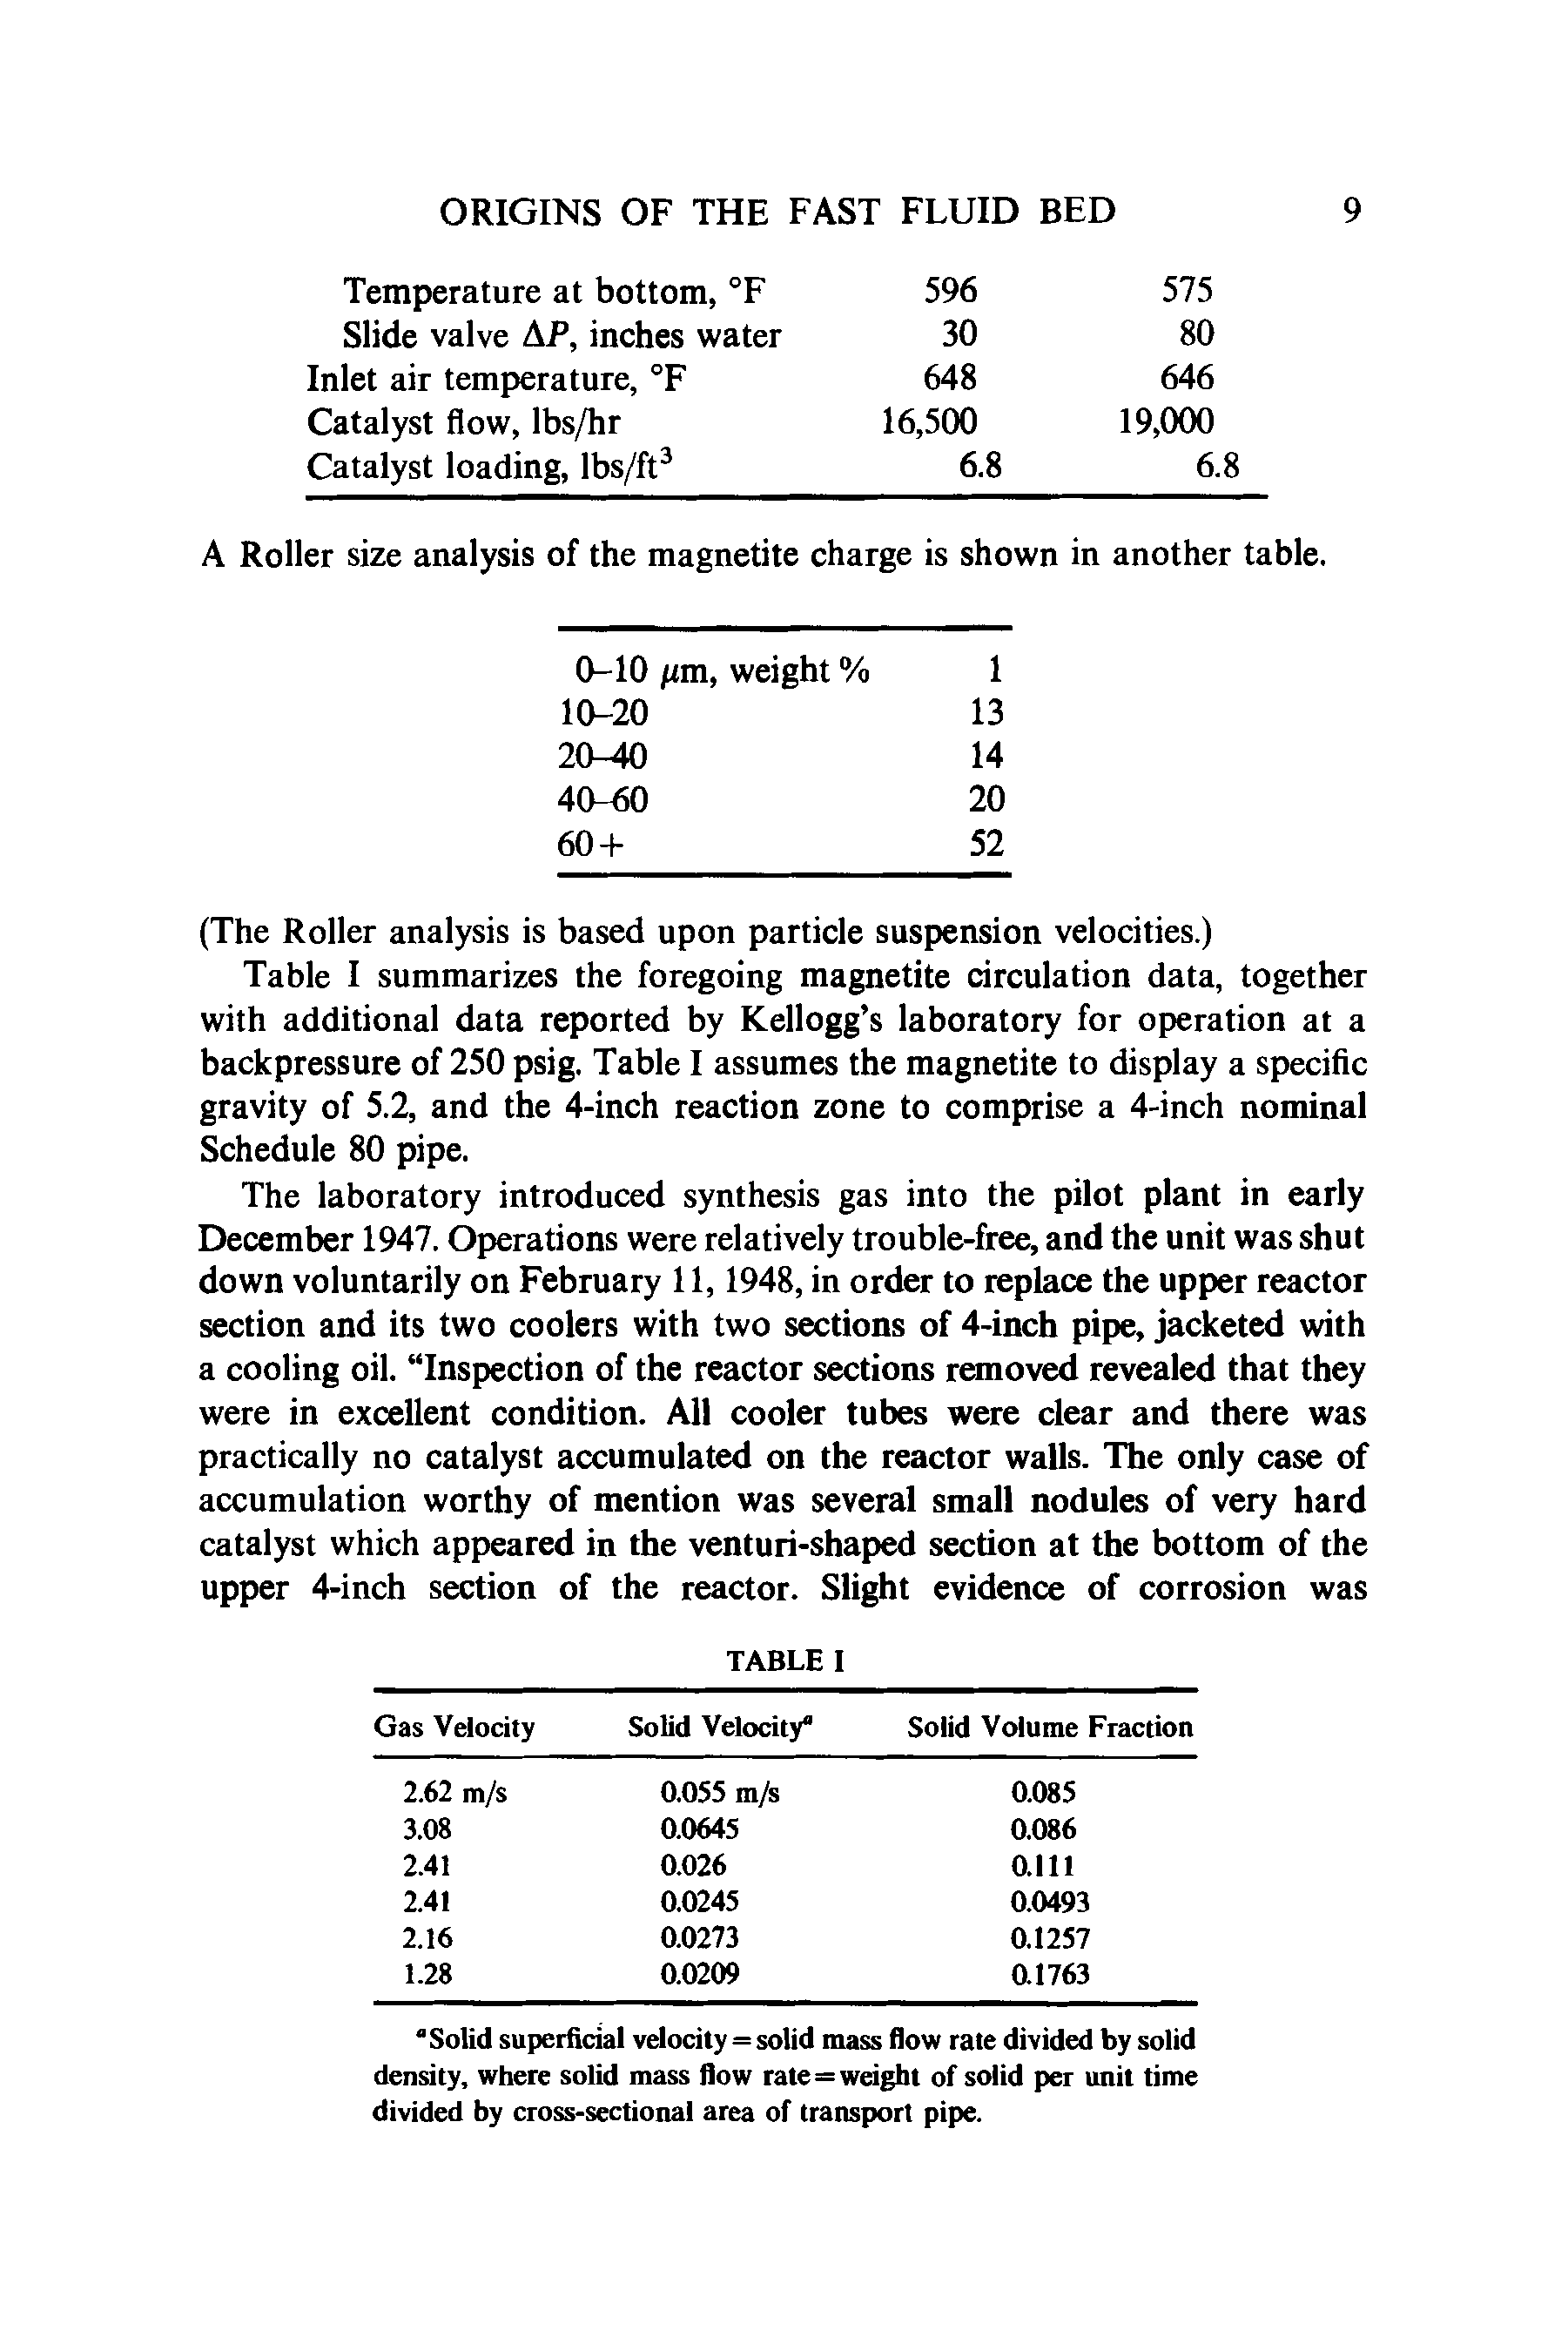 Table I summarizes the foregoing magnetite circulation data, together with additional data reported by Kellogg s laboratory for operation at a backpressure of 250 psig. Table I assumes the magnetite to display a specific gravity of 5.2, and the 4-inch reaction zone to comprise a 4-inch nominal Schedule 80 pipe.